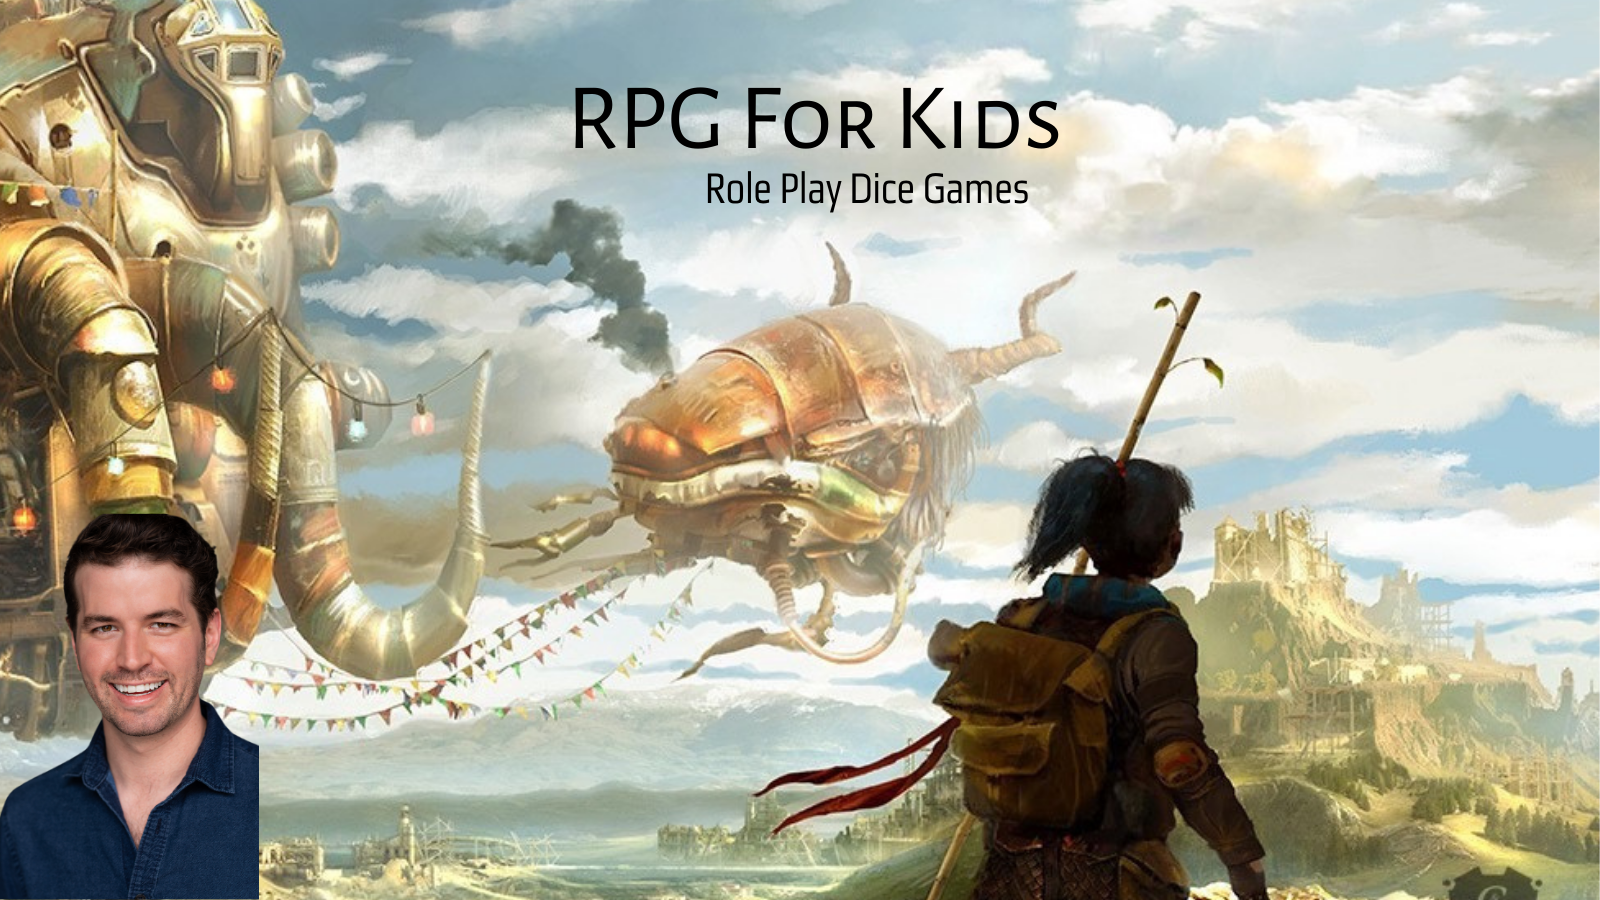 rpg video games for kids